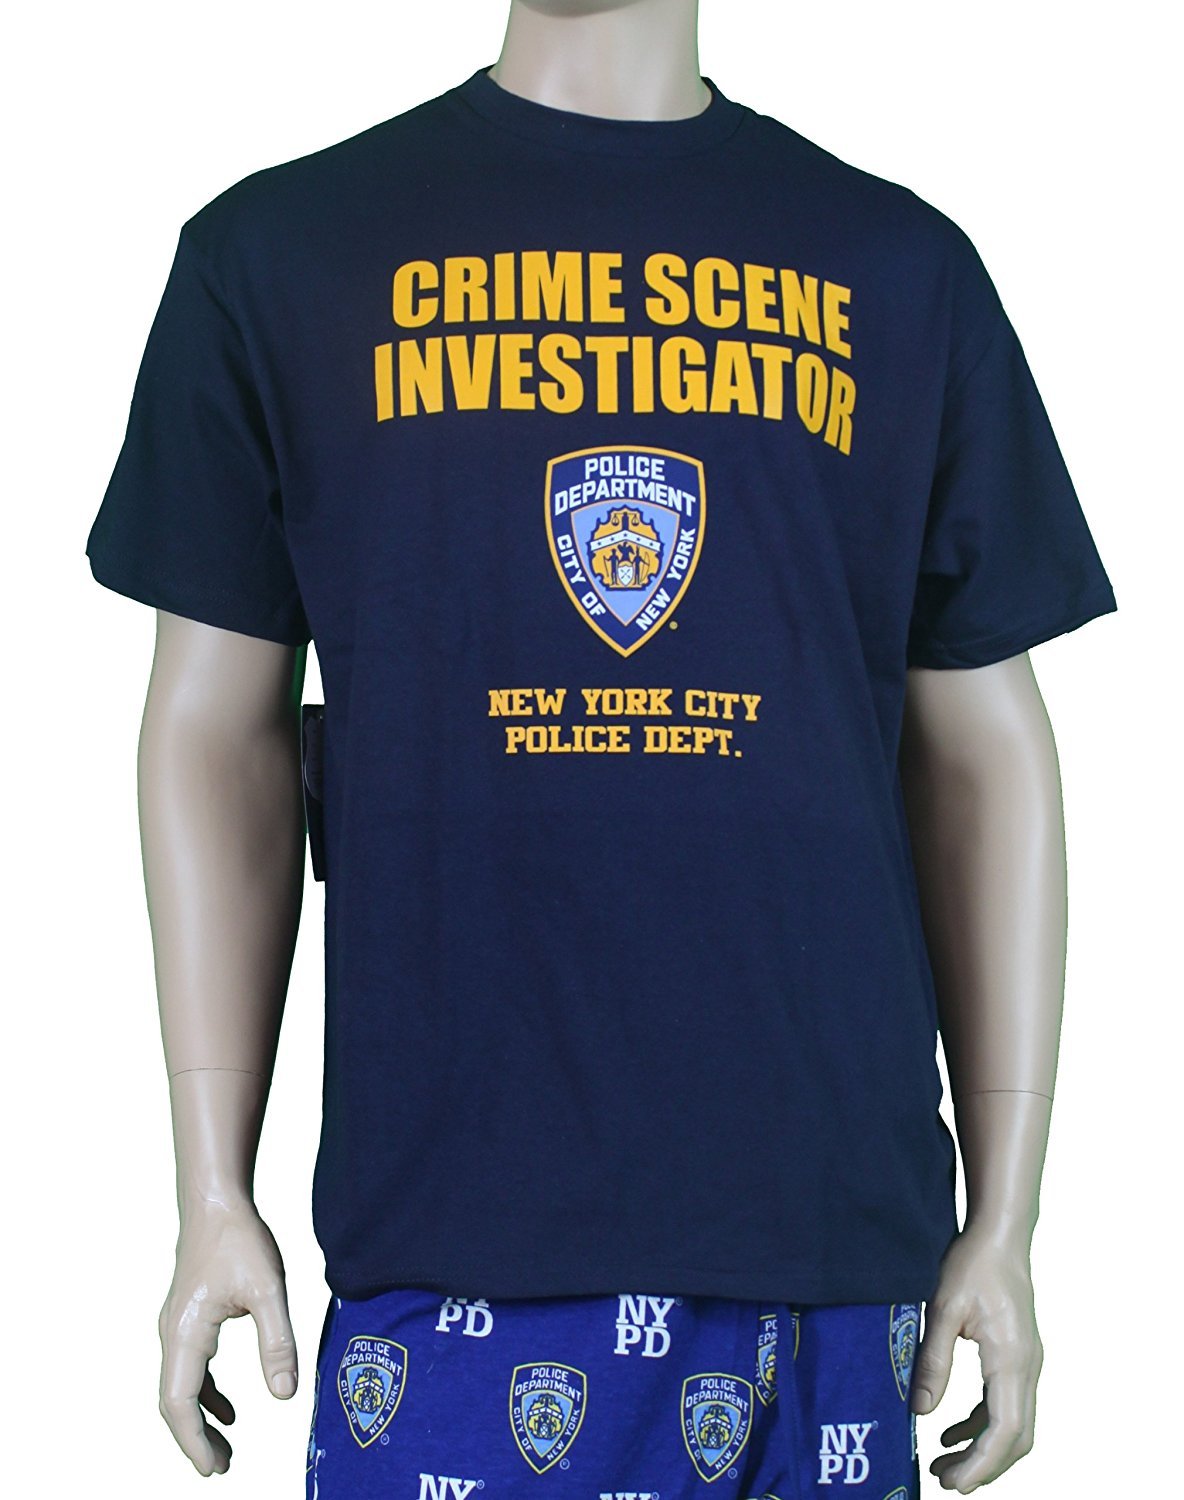 NYPD Yankees shirt - Trend T Shirt Store Online